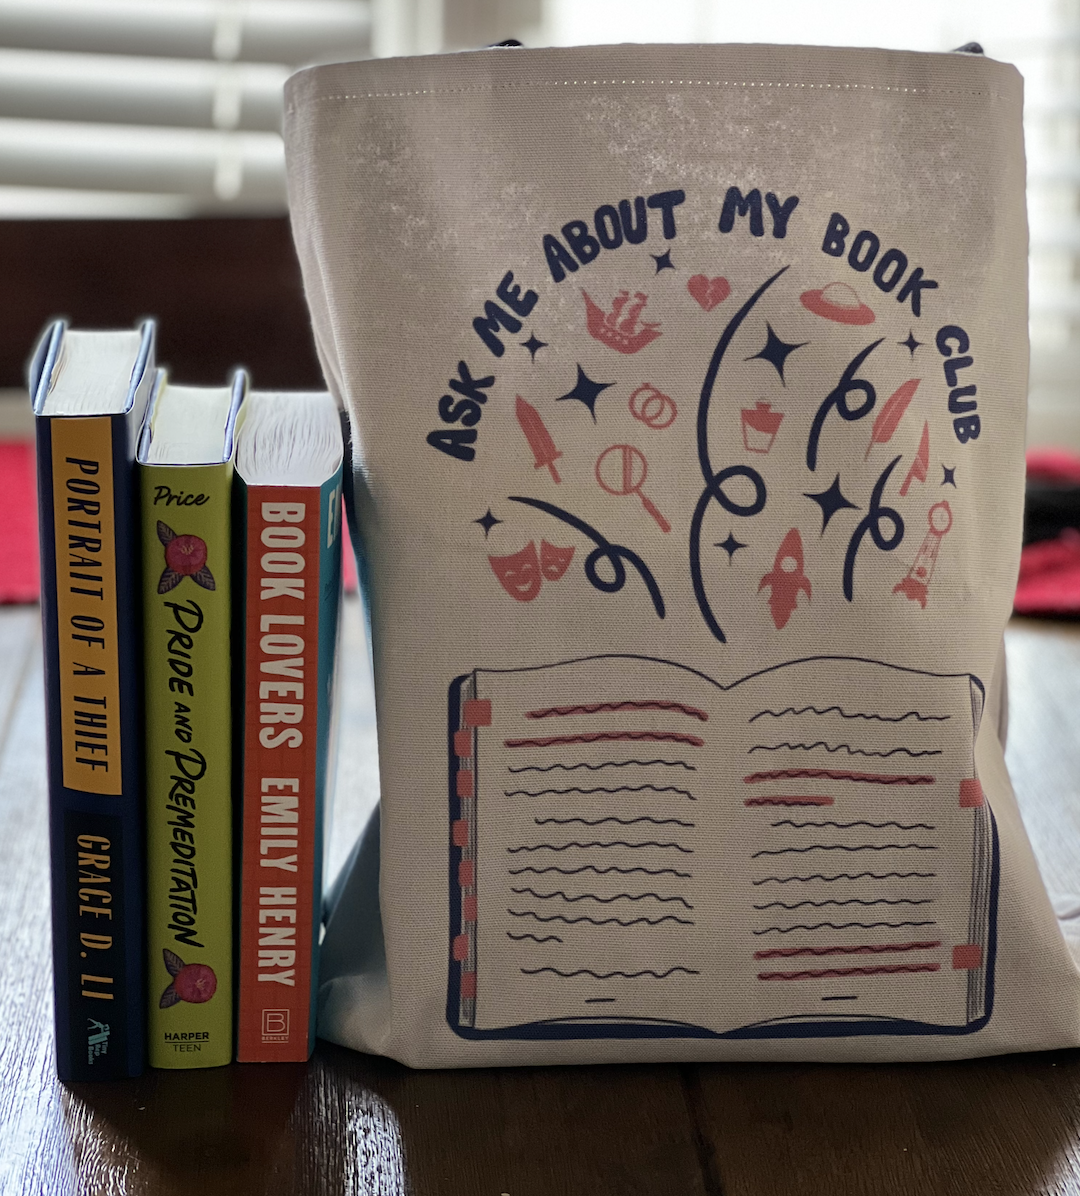 a photo of the tote bag next to books